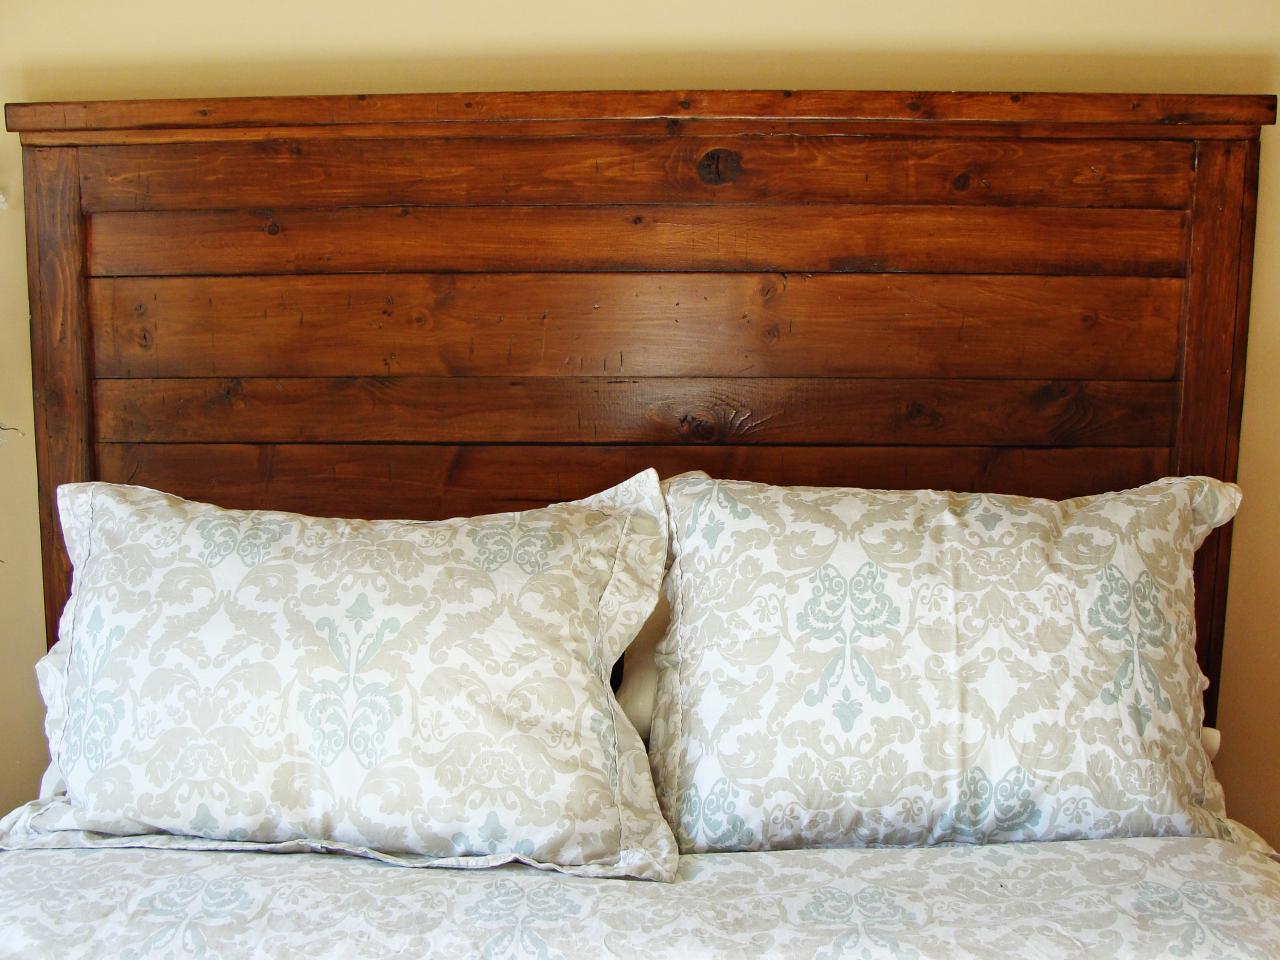 How to attach a headboard to a wooden bed frame Hollywood Bed Frame Black Adjustable Bedframe Headboard Footboard Hook On Bed Rails 401r I The Home Depot